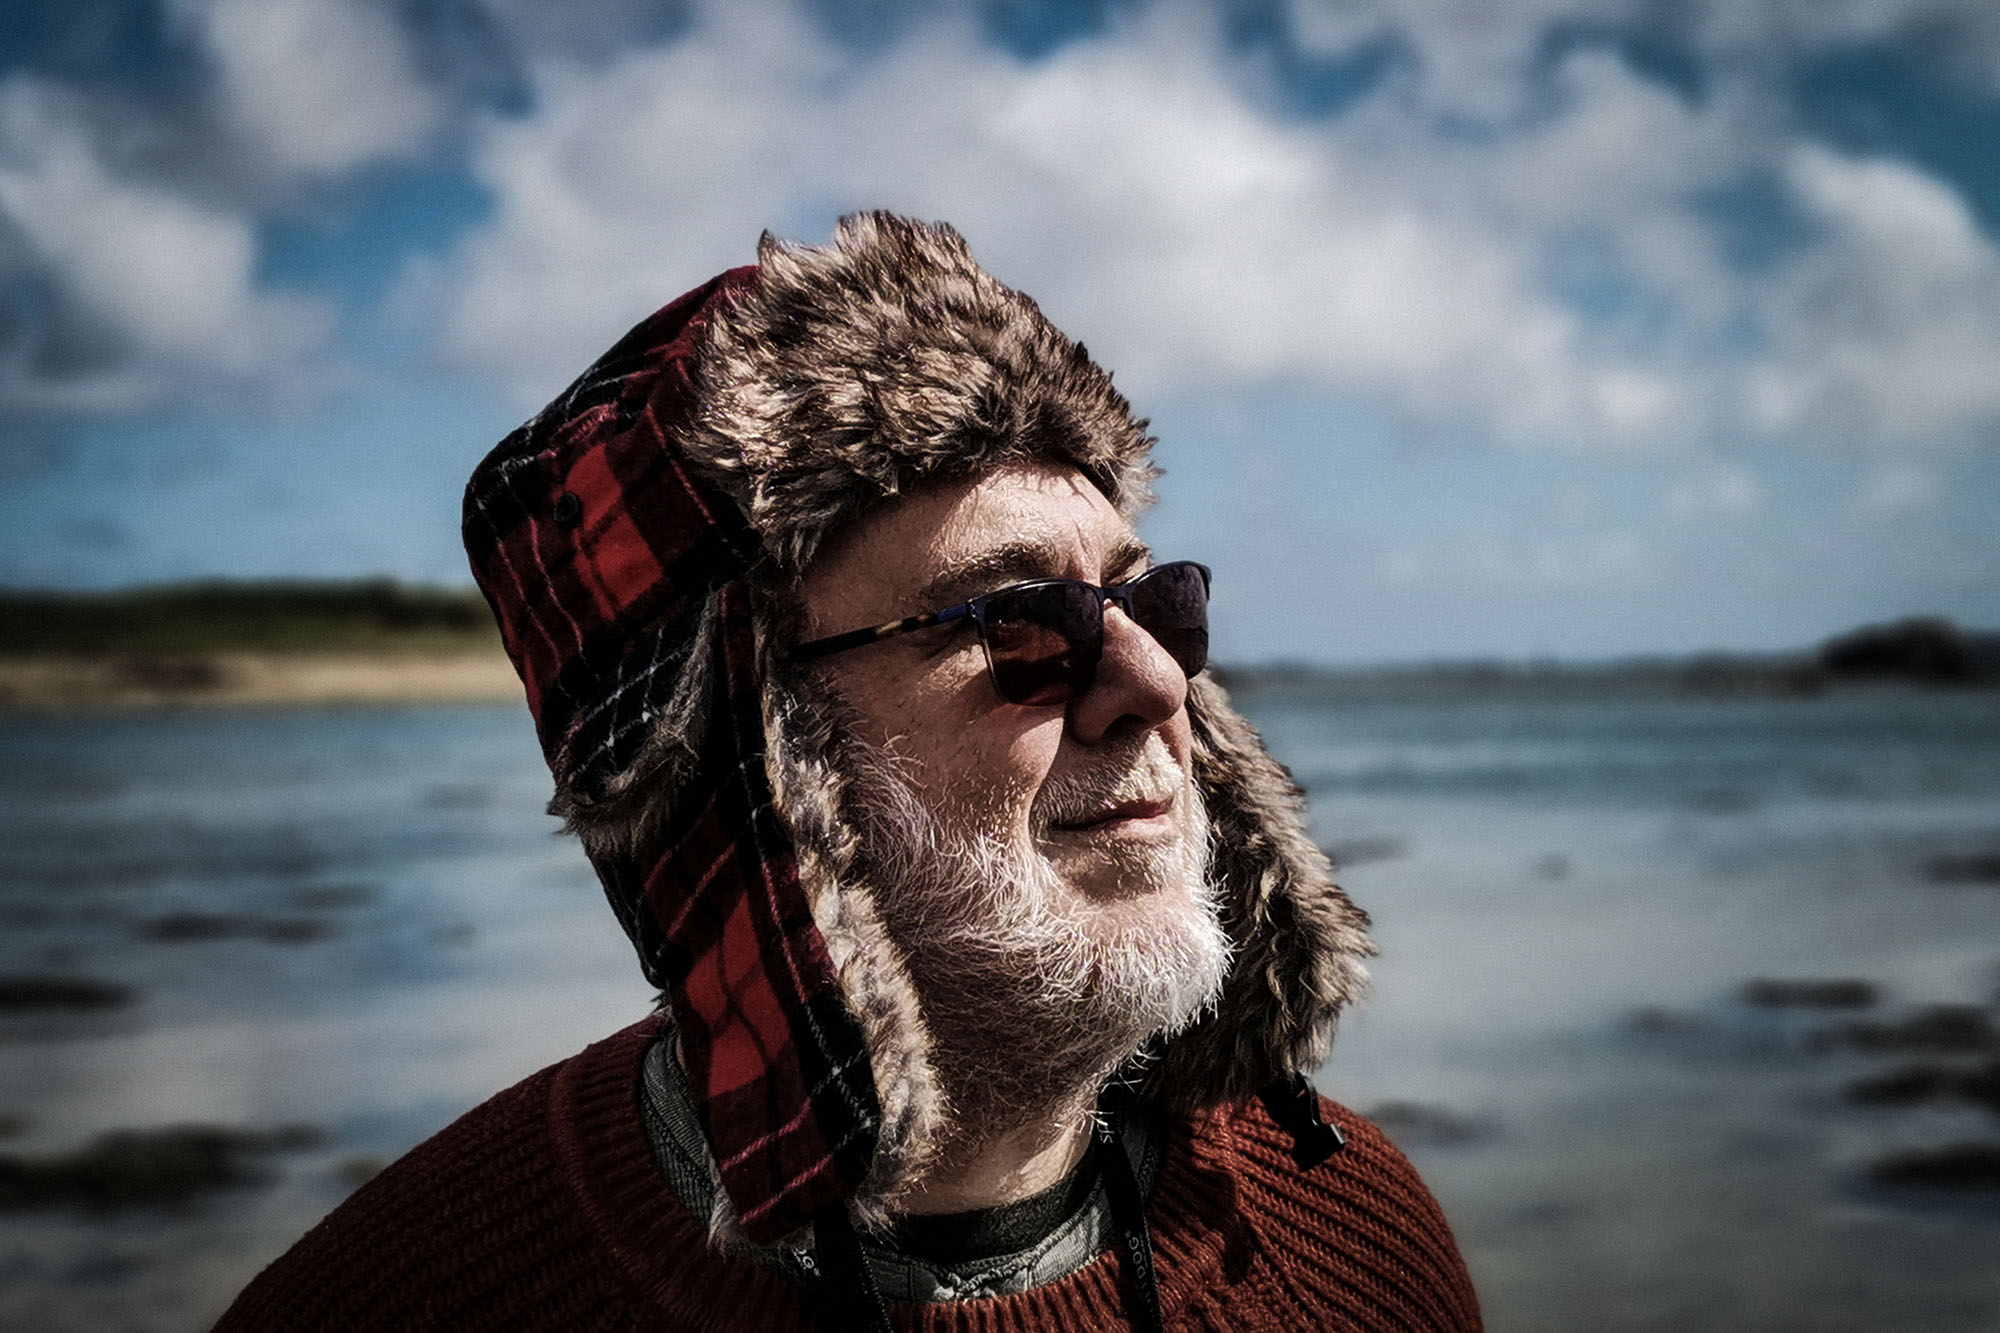 Robin Guthrie Releases His First LP In 9 Years, The Stunning "Pearldiving"